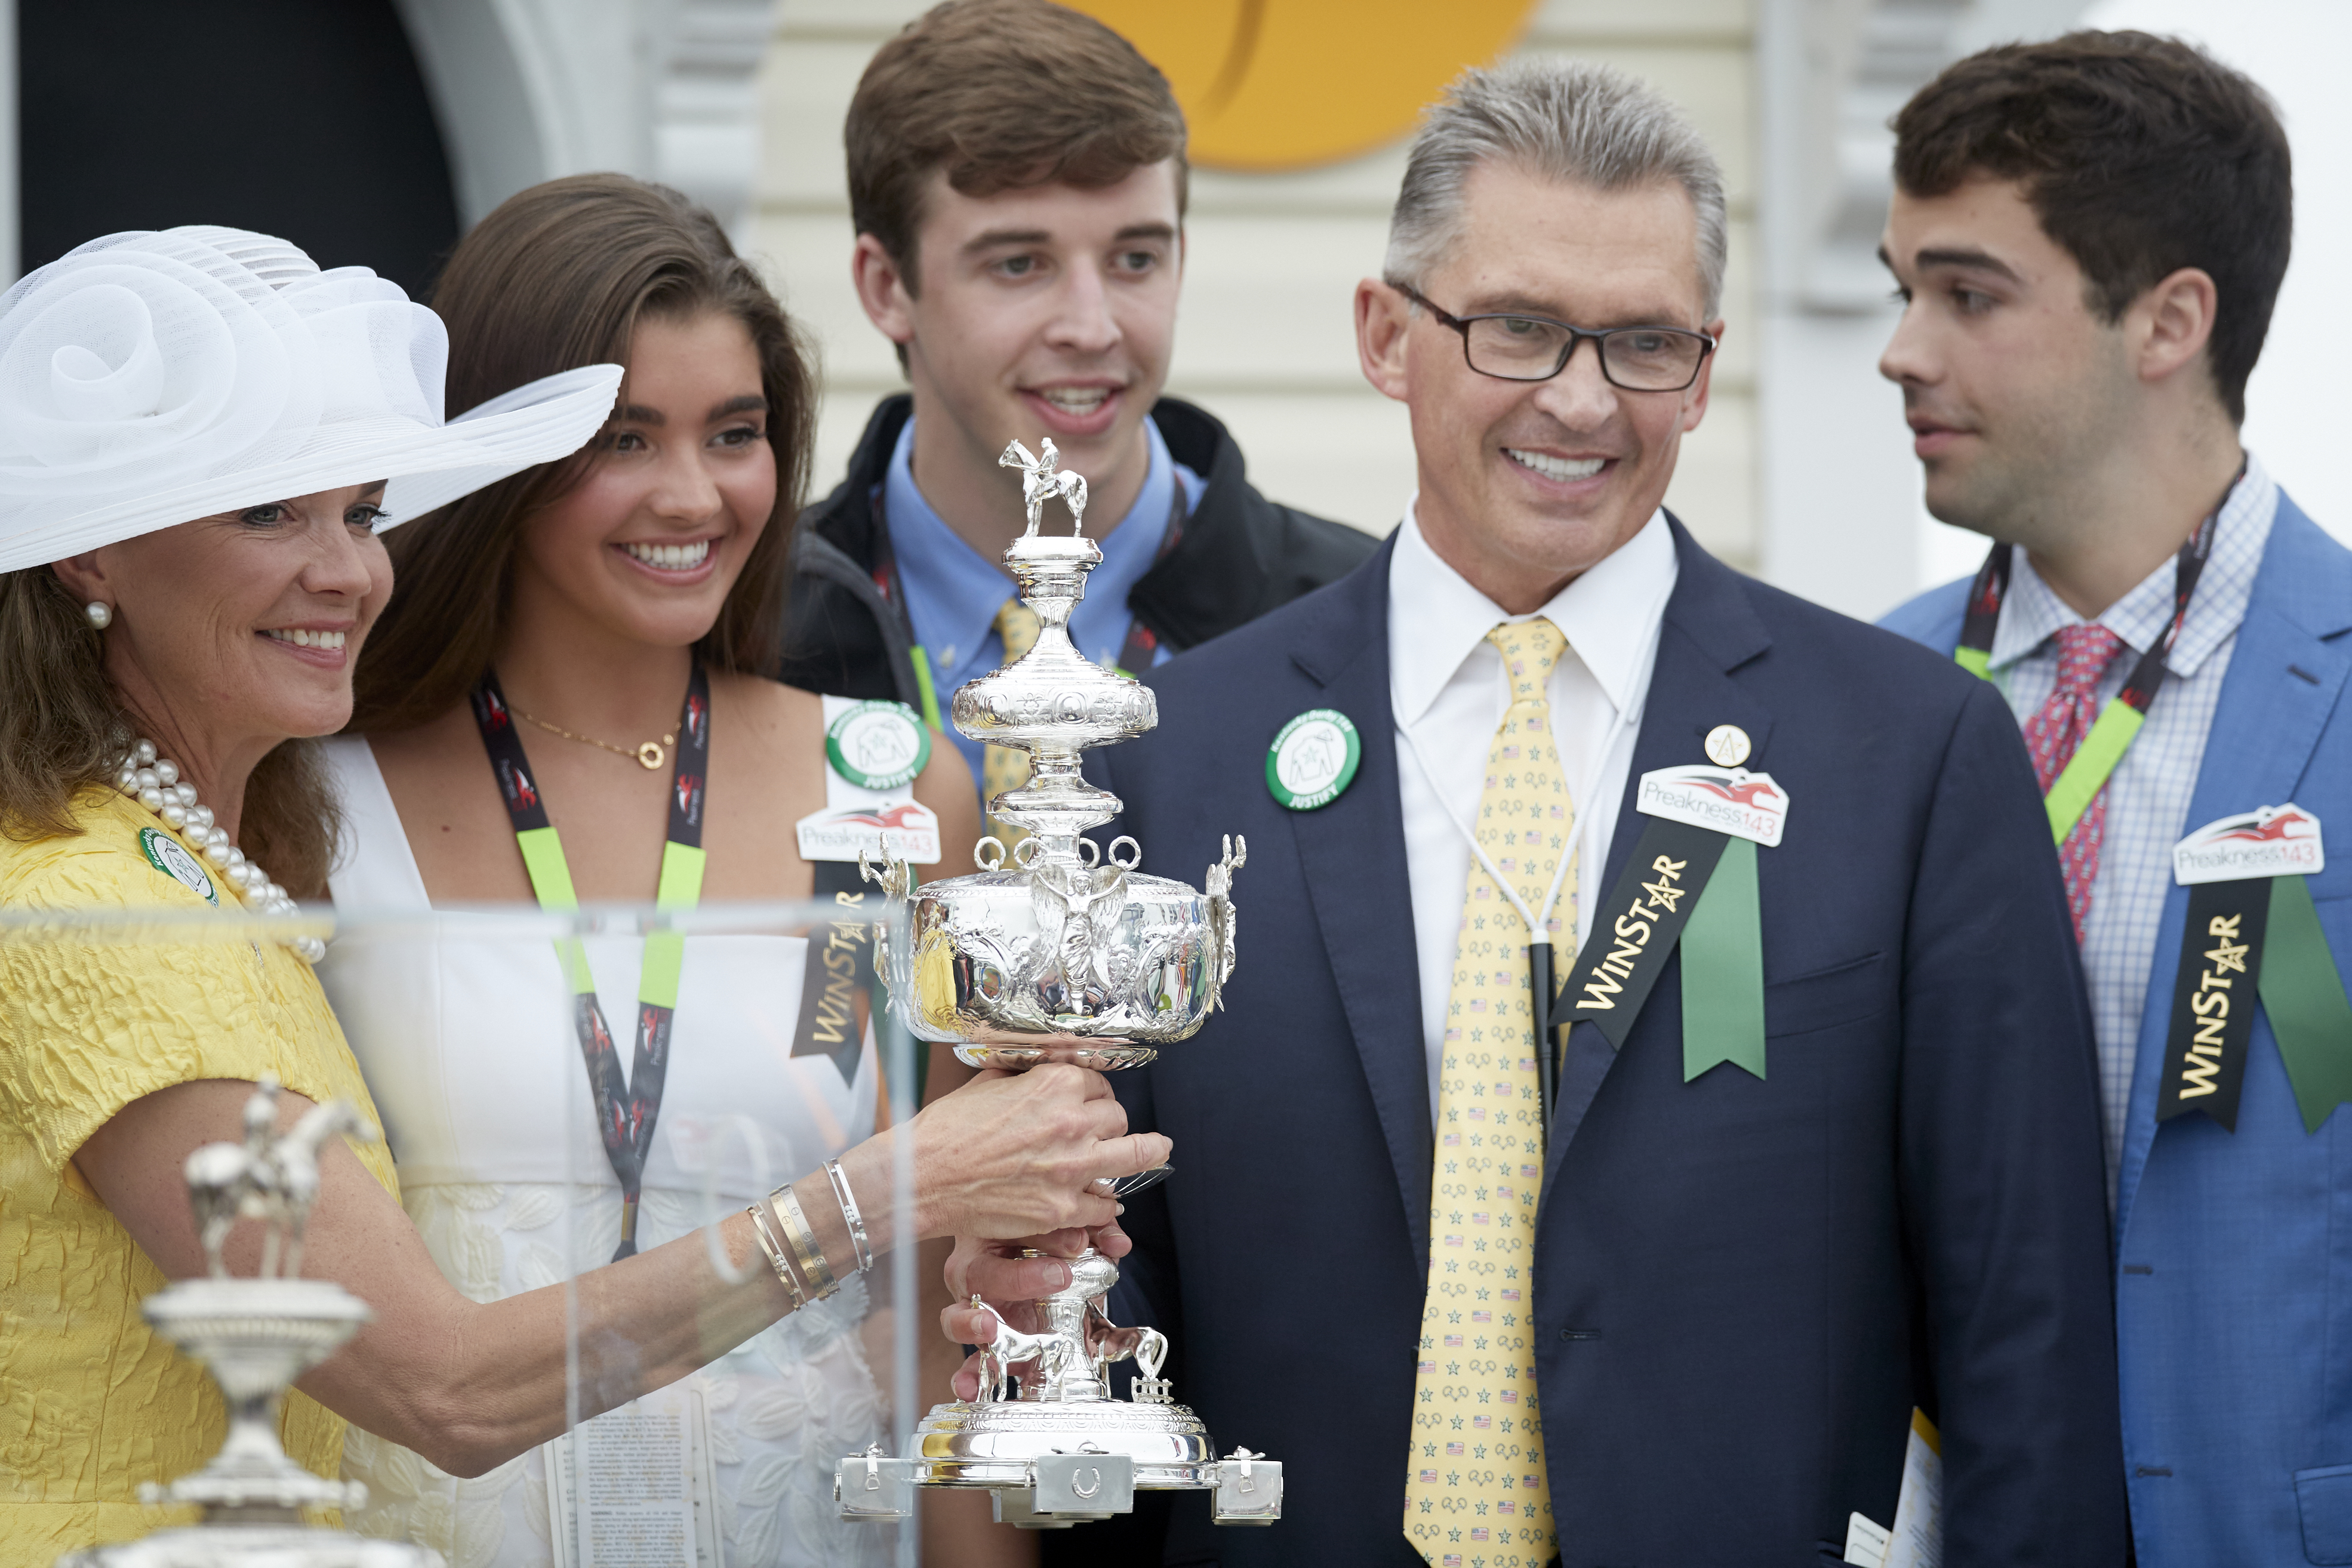 Lisa, Savannah, Grant, Kenny and Preston Troutt posing with their trophy at the 2018 Preakness Stakes on May 19, 2018 in Baltimore |  Source: Getty Images